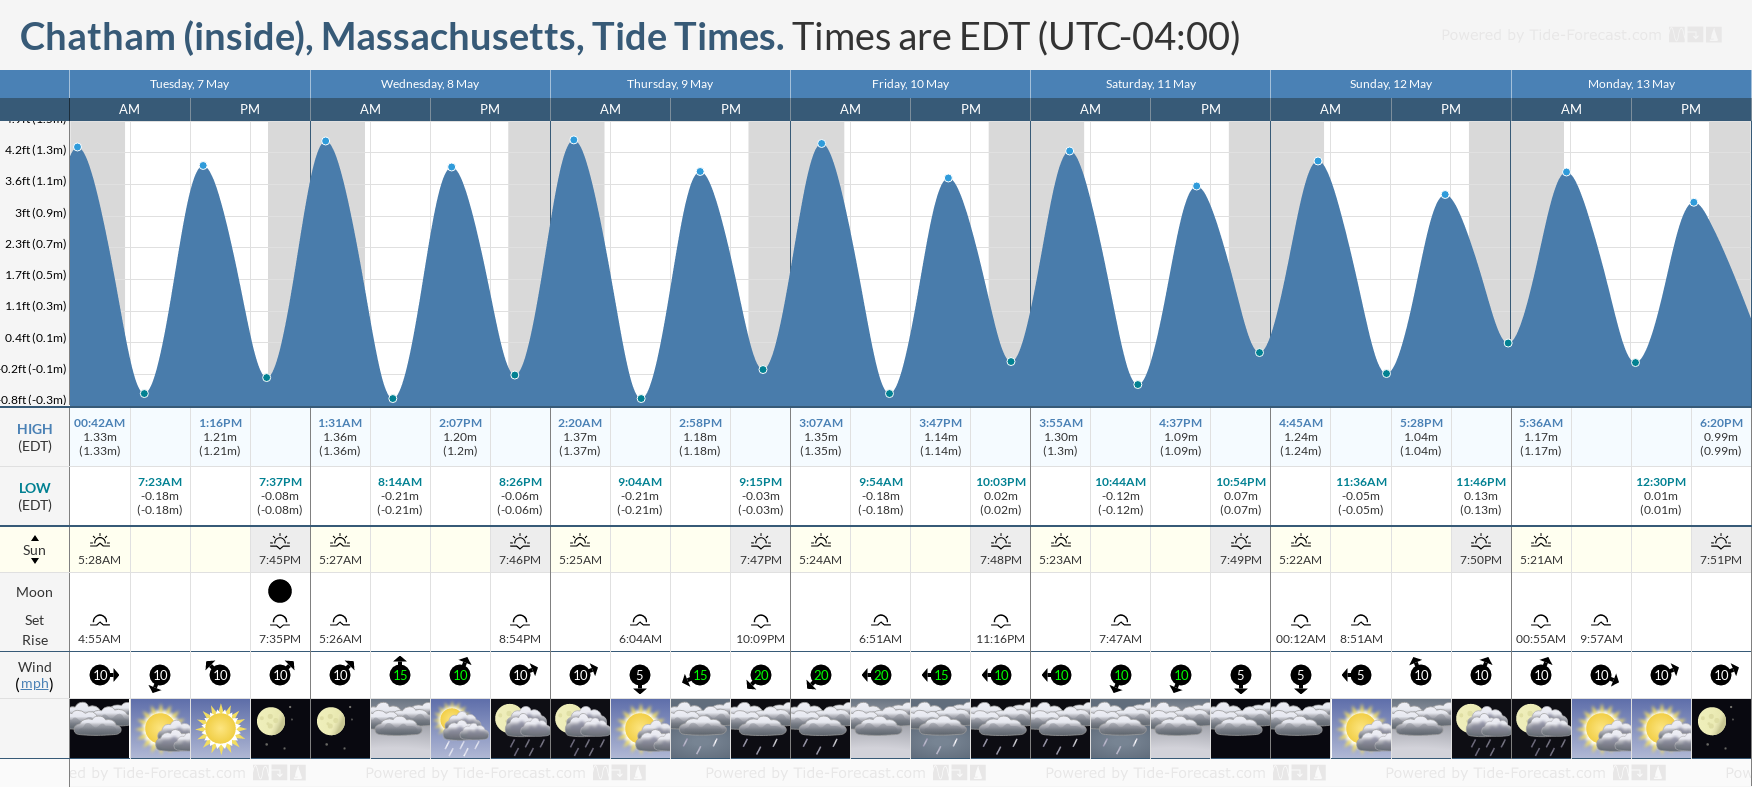 Chatham (inside), Massachusetts Tide Chart including high and low tide times for the next 7 days